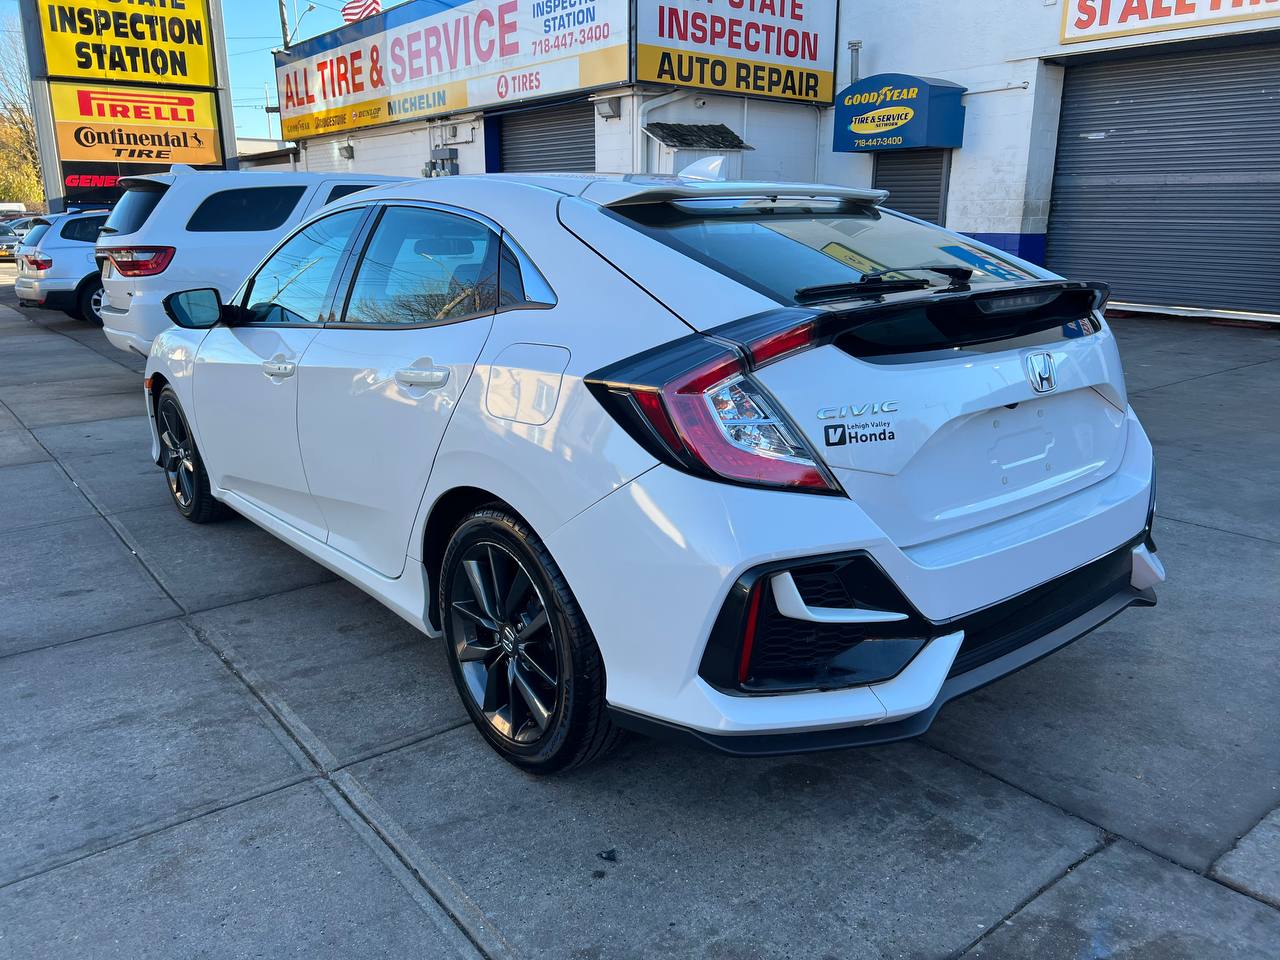 Used - Honda CIVIC EX Hatchback for sale in Staten Island NY